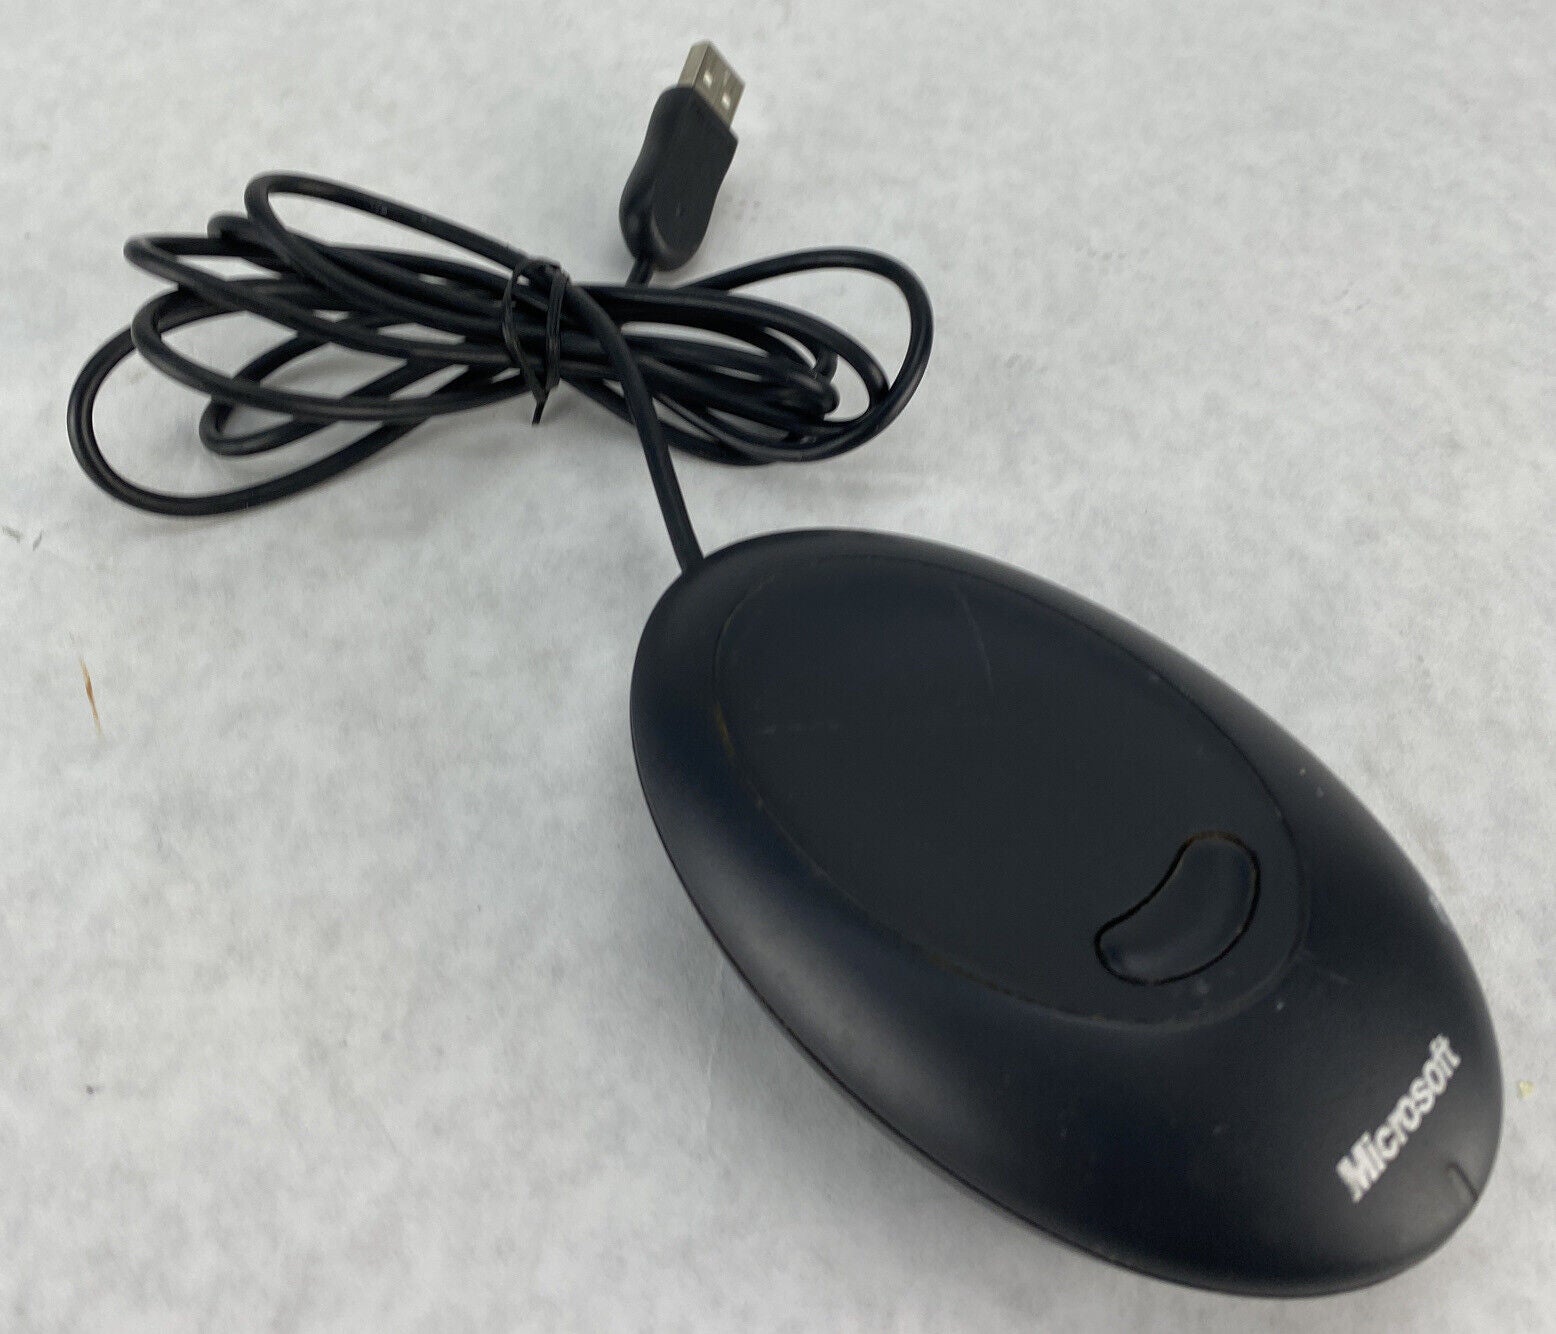 Microsoft 1009 X09-55149 USB Wireless Optical Mouse Receiver 2.0 ONLY